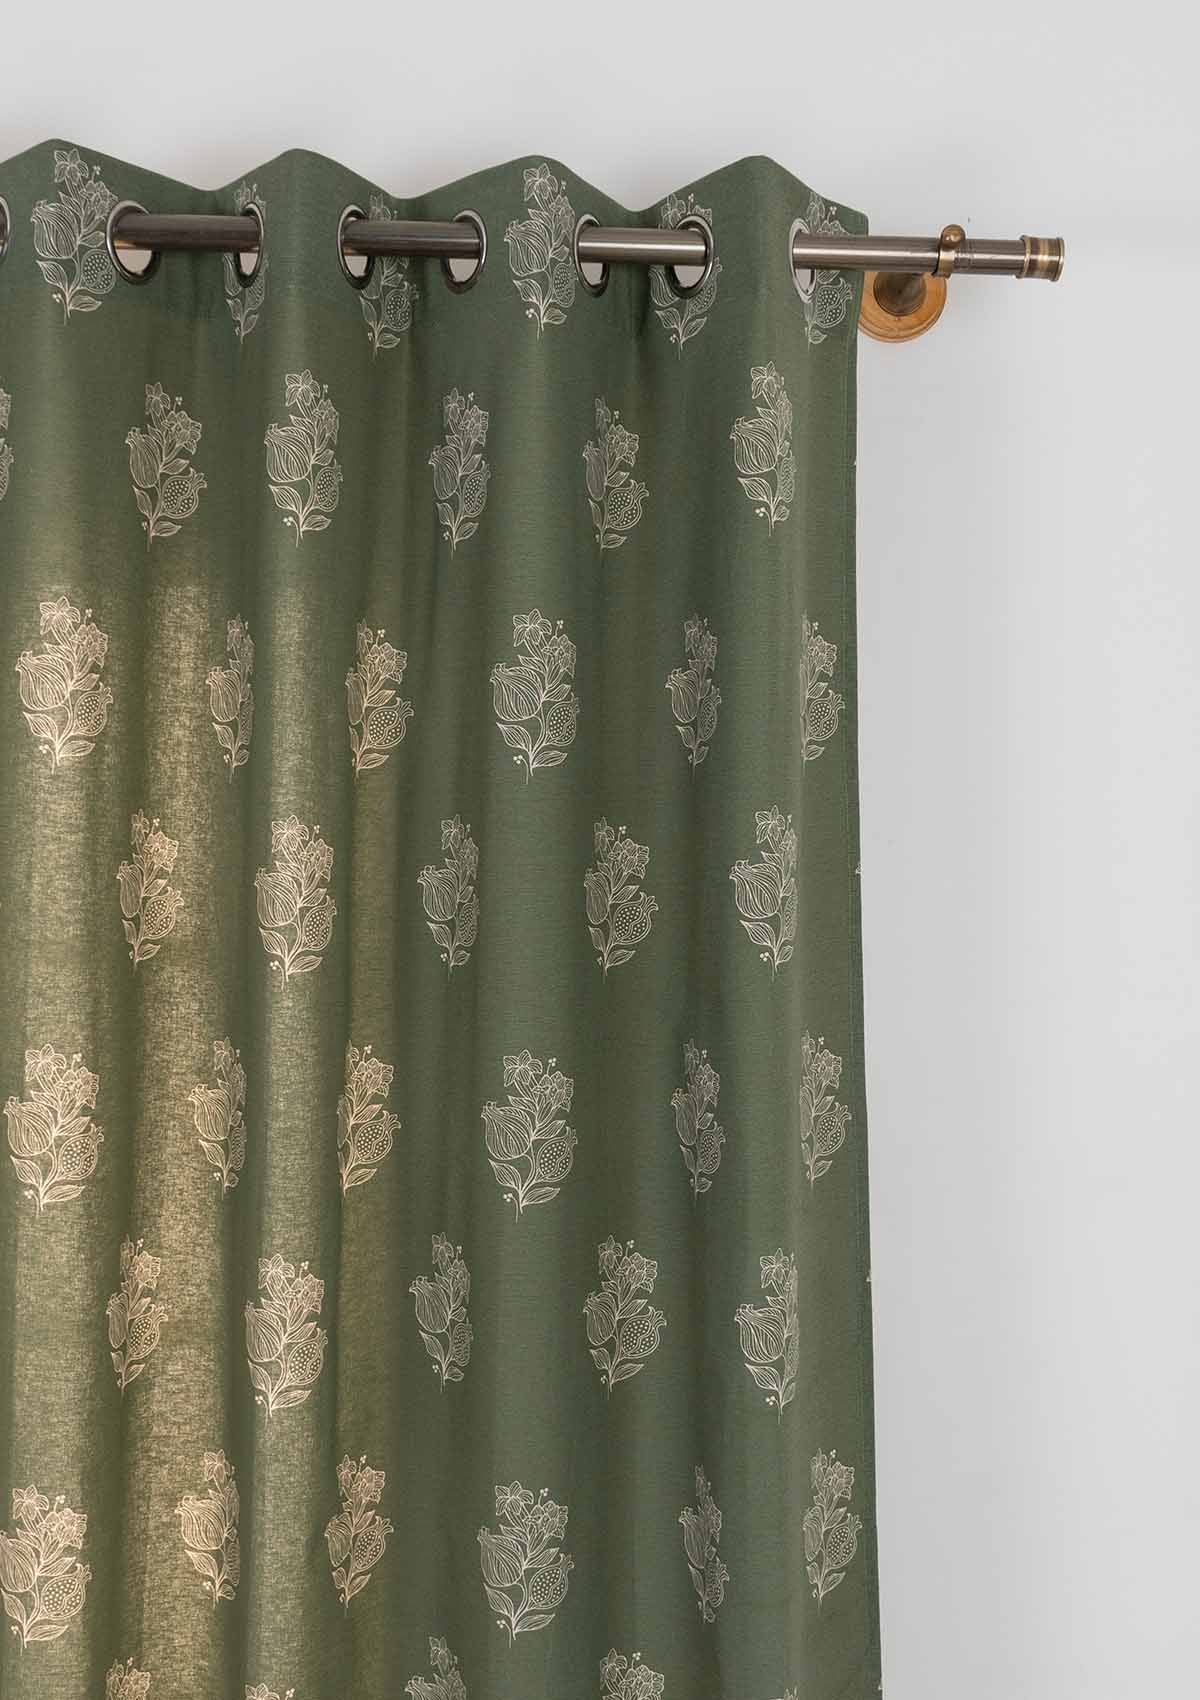 Malabar Printed 100% cotton ethnic curtain for living room & Bedroom - Room darkening - Pepper Green - Pack of 1